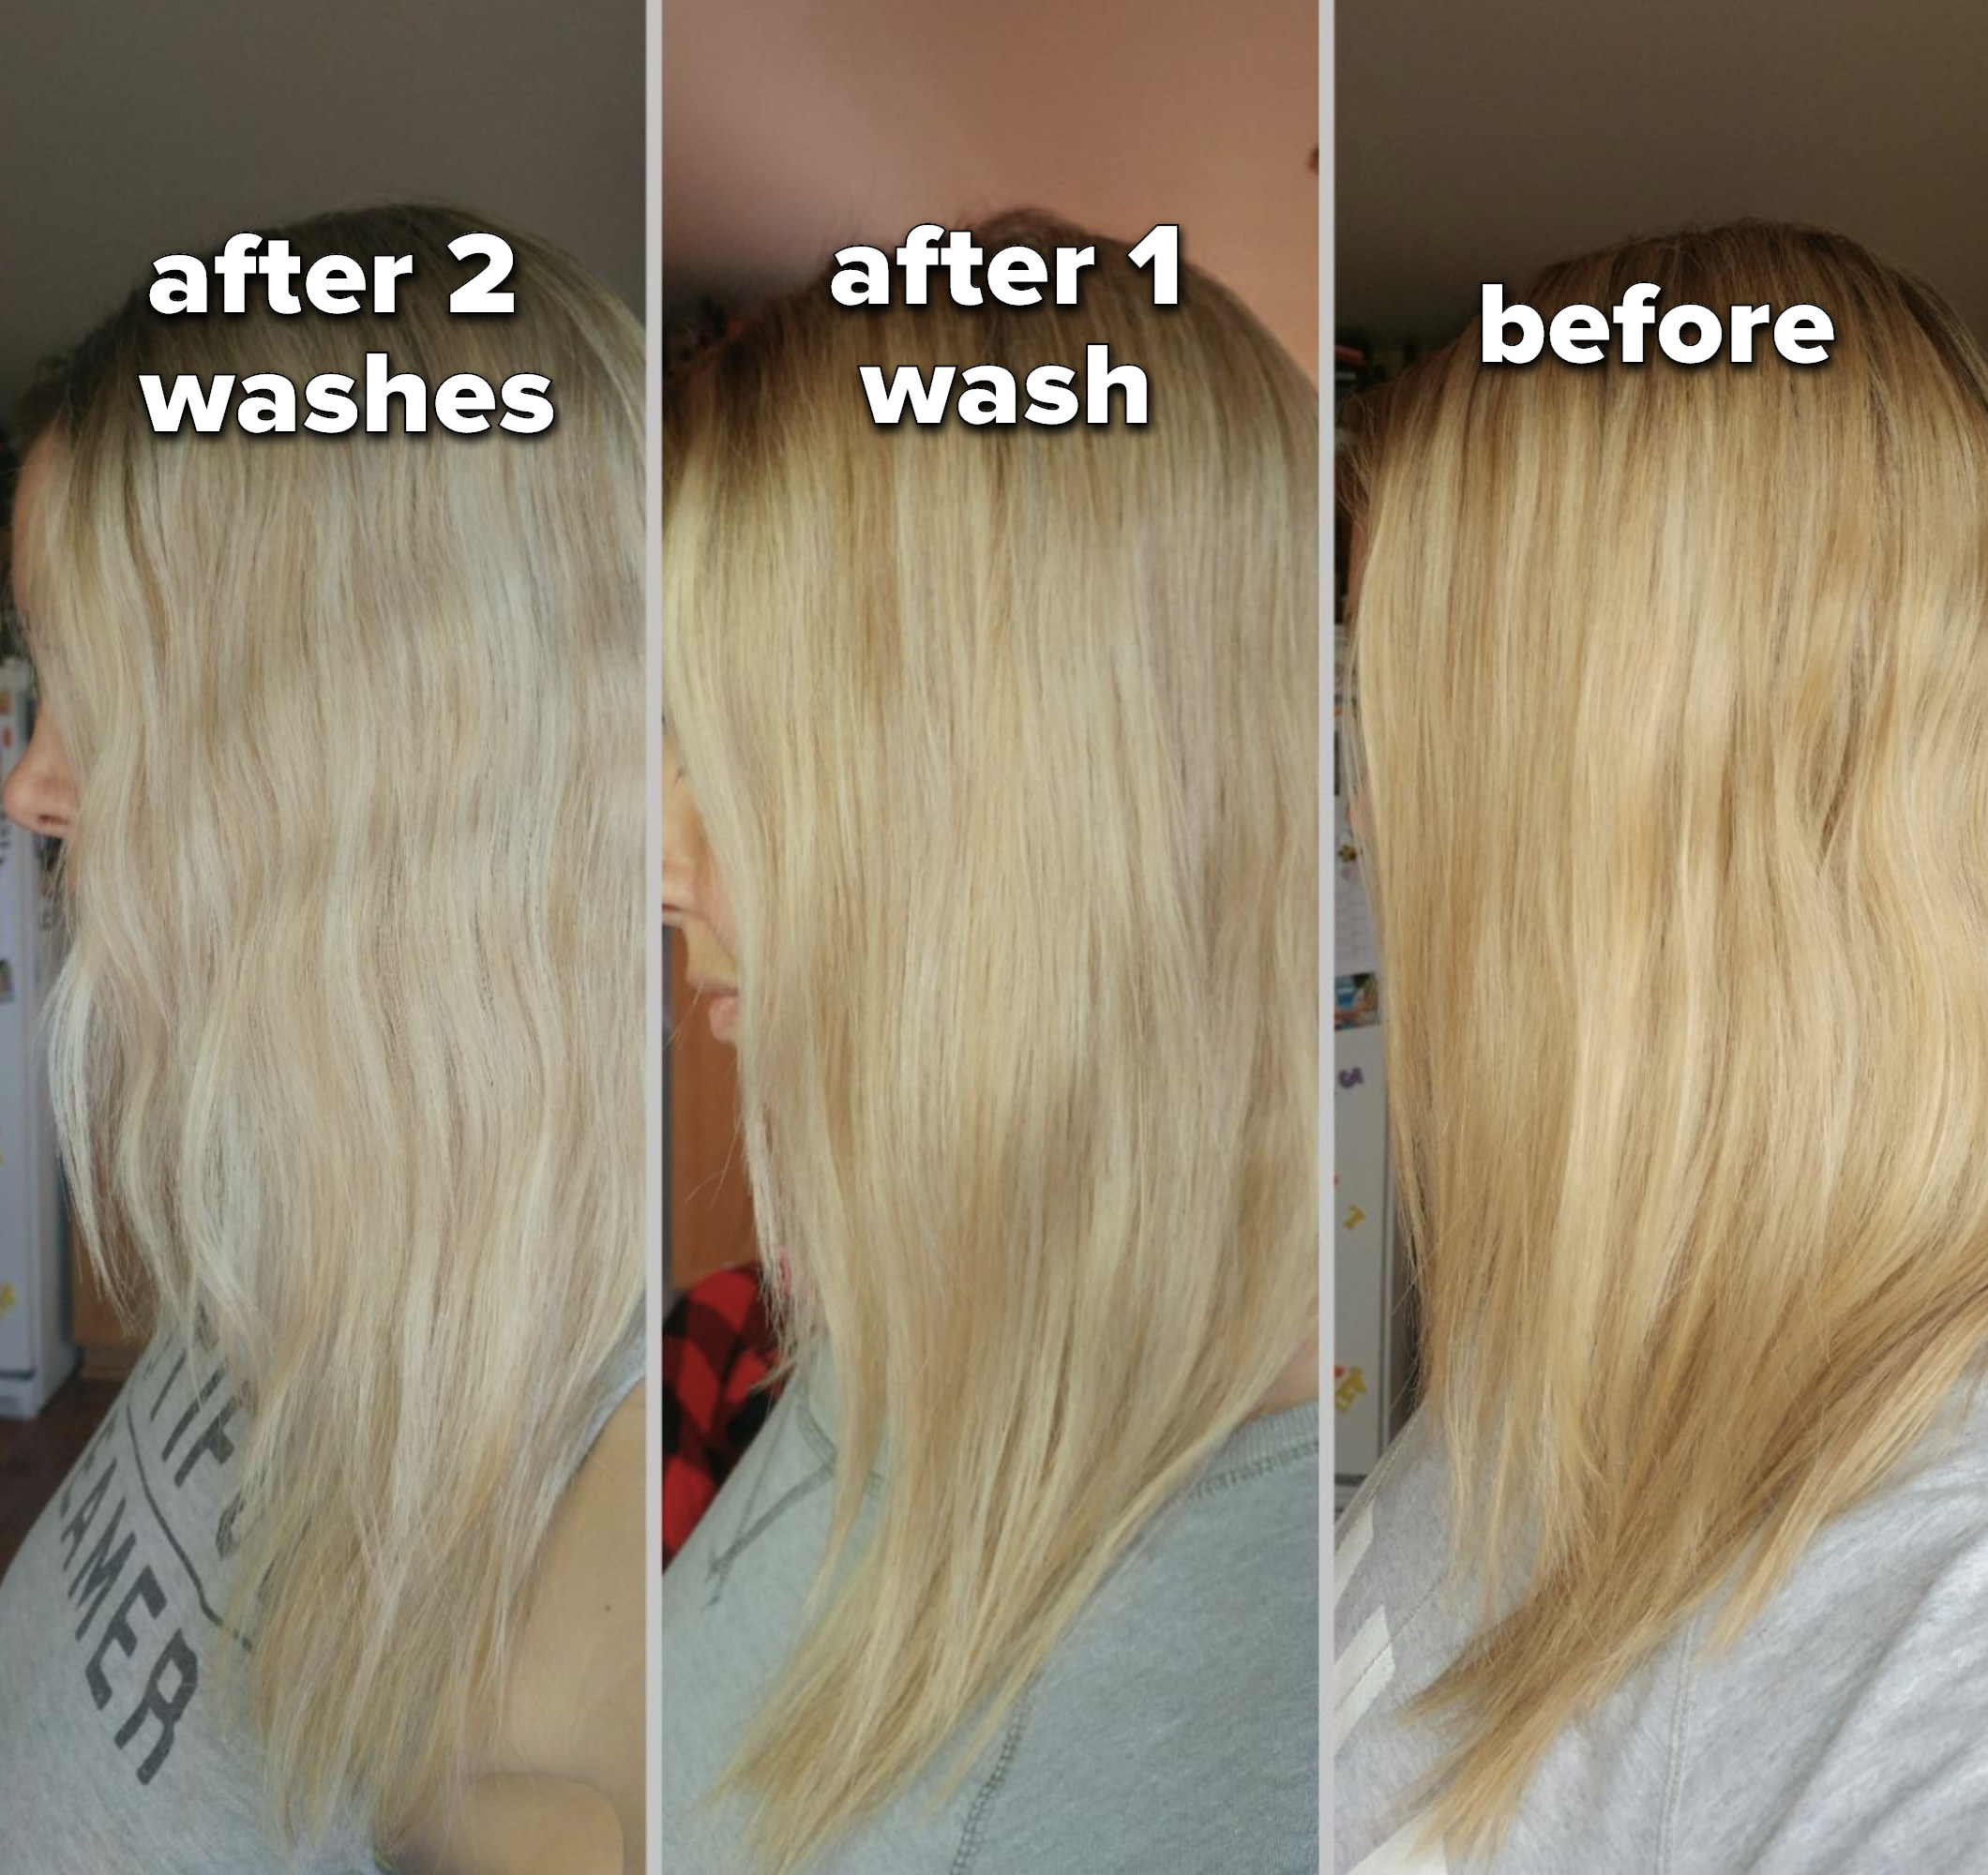 Three reviewer photos showing the progression after one wash and then two. The after photos get progressively lighter and less yellowish.